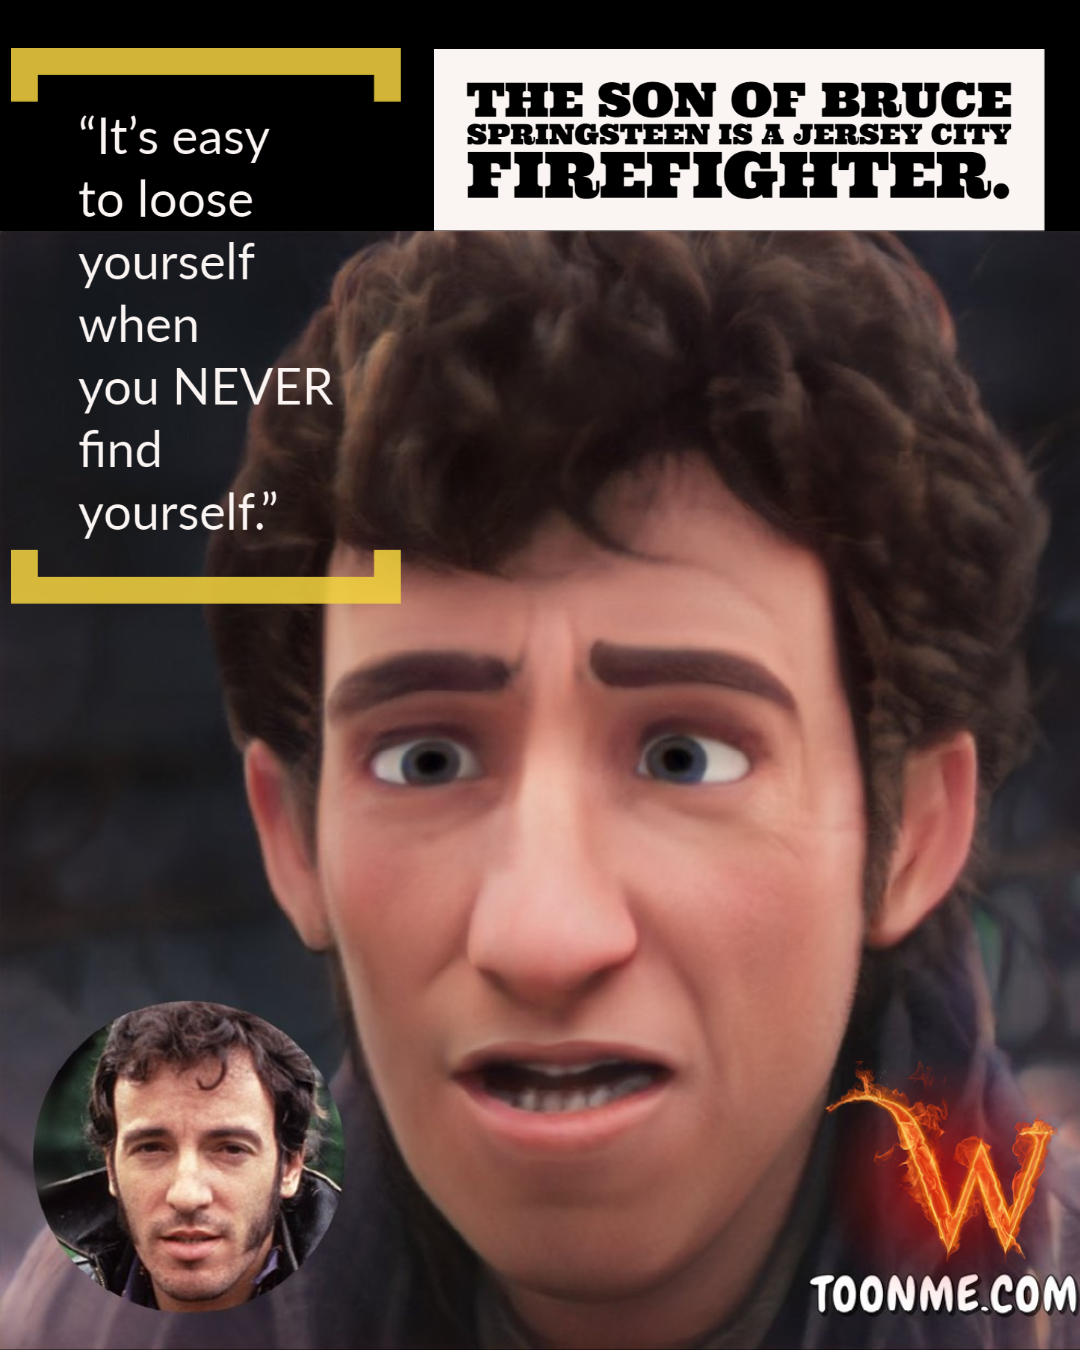 sam springsteen is now a firefighter